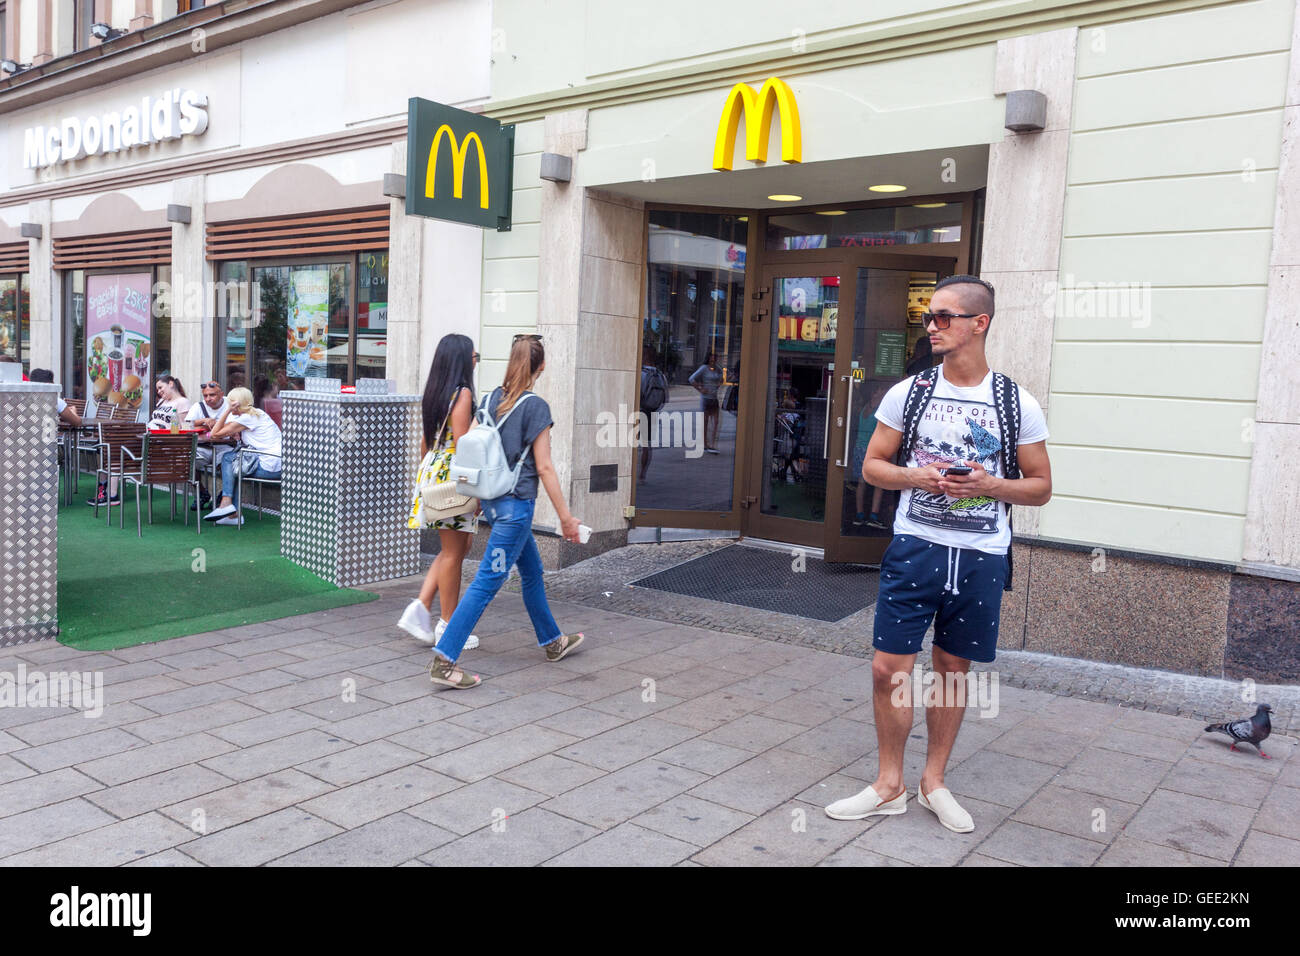 McDonald's Karlovy Vary eating place Spa Town Stock Photo